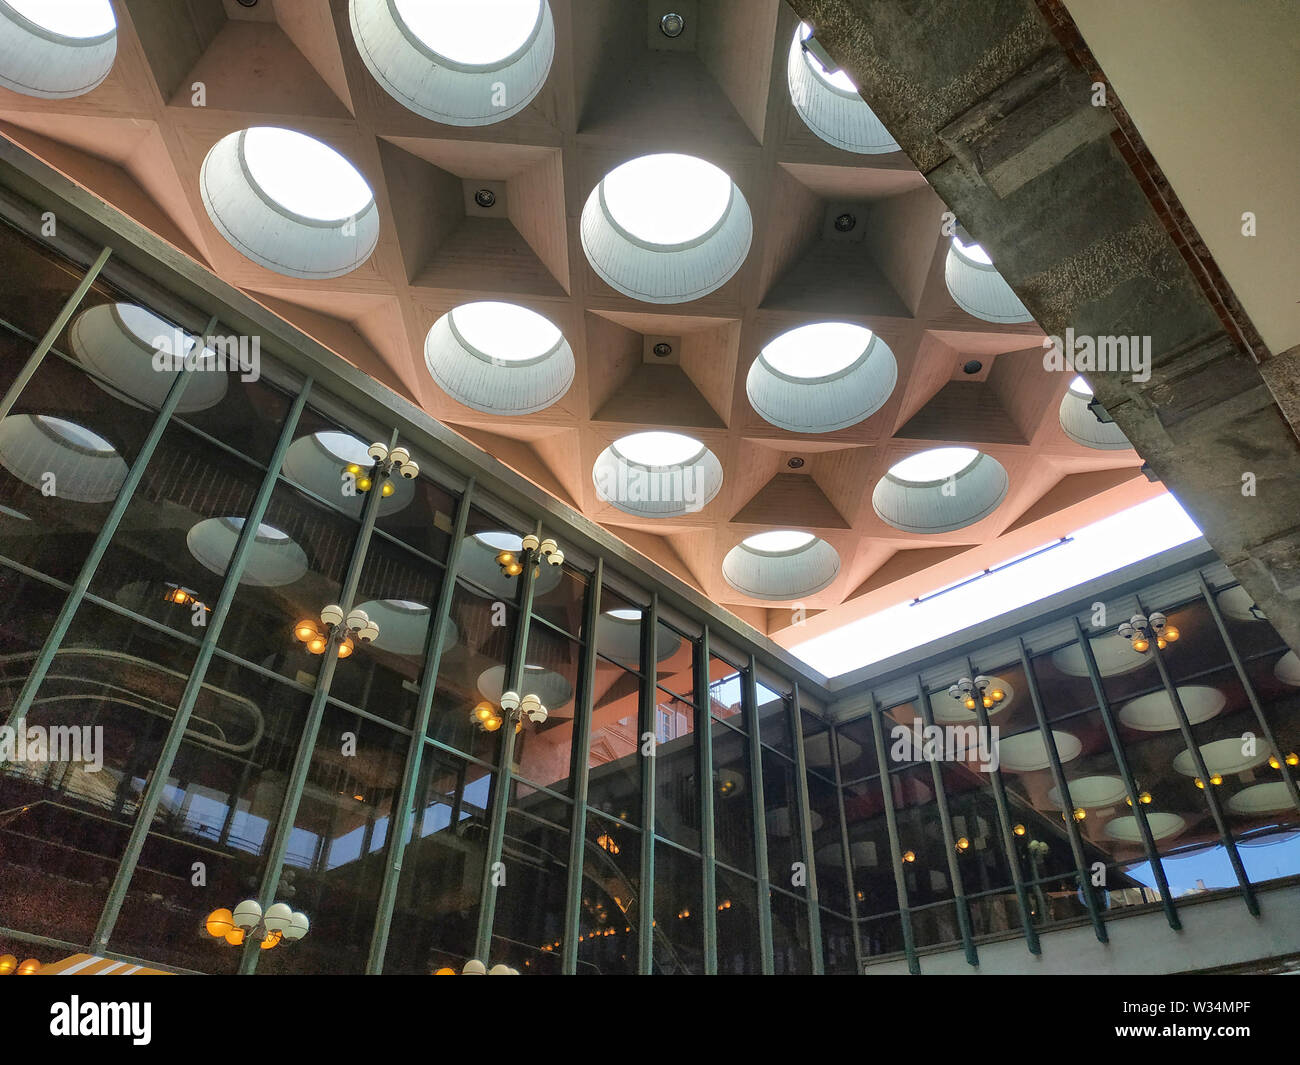 Turin, Piemonte, Italy. June 2019. At the Teatro Regio, detail of the modern structure, natural light enters from the large circular portholes illumin Stock Photo